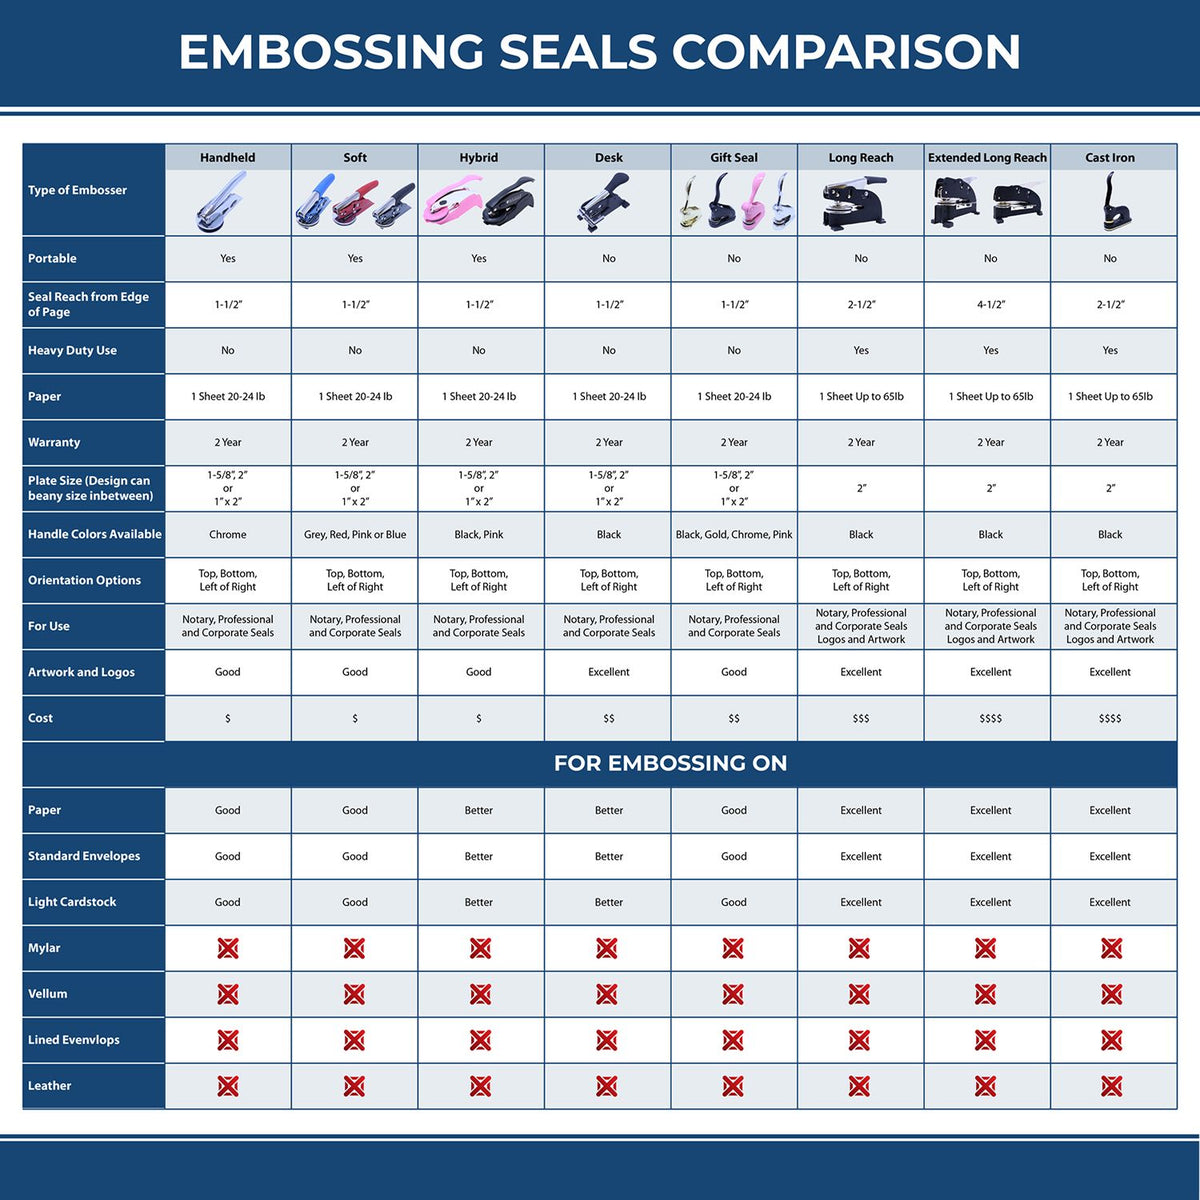 A comparison chart for the different types of mount models available for the Soft Pocket Virginia Landscape Architect Embosser.